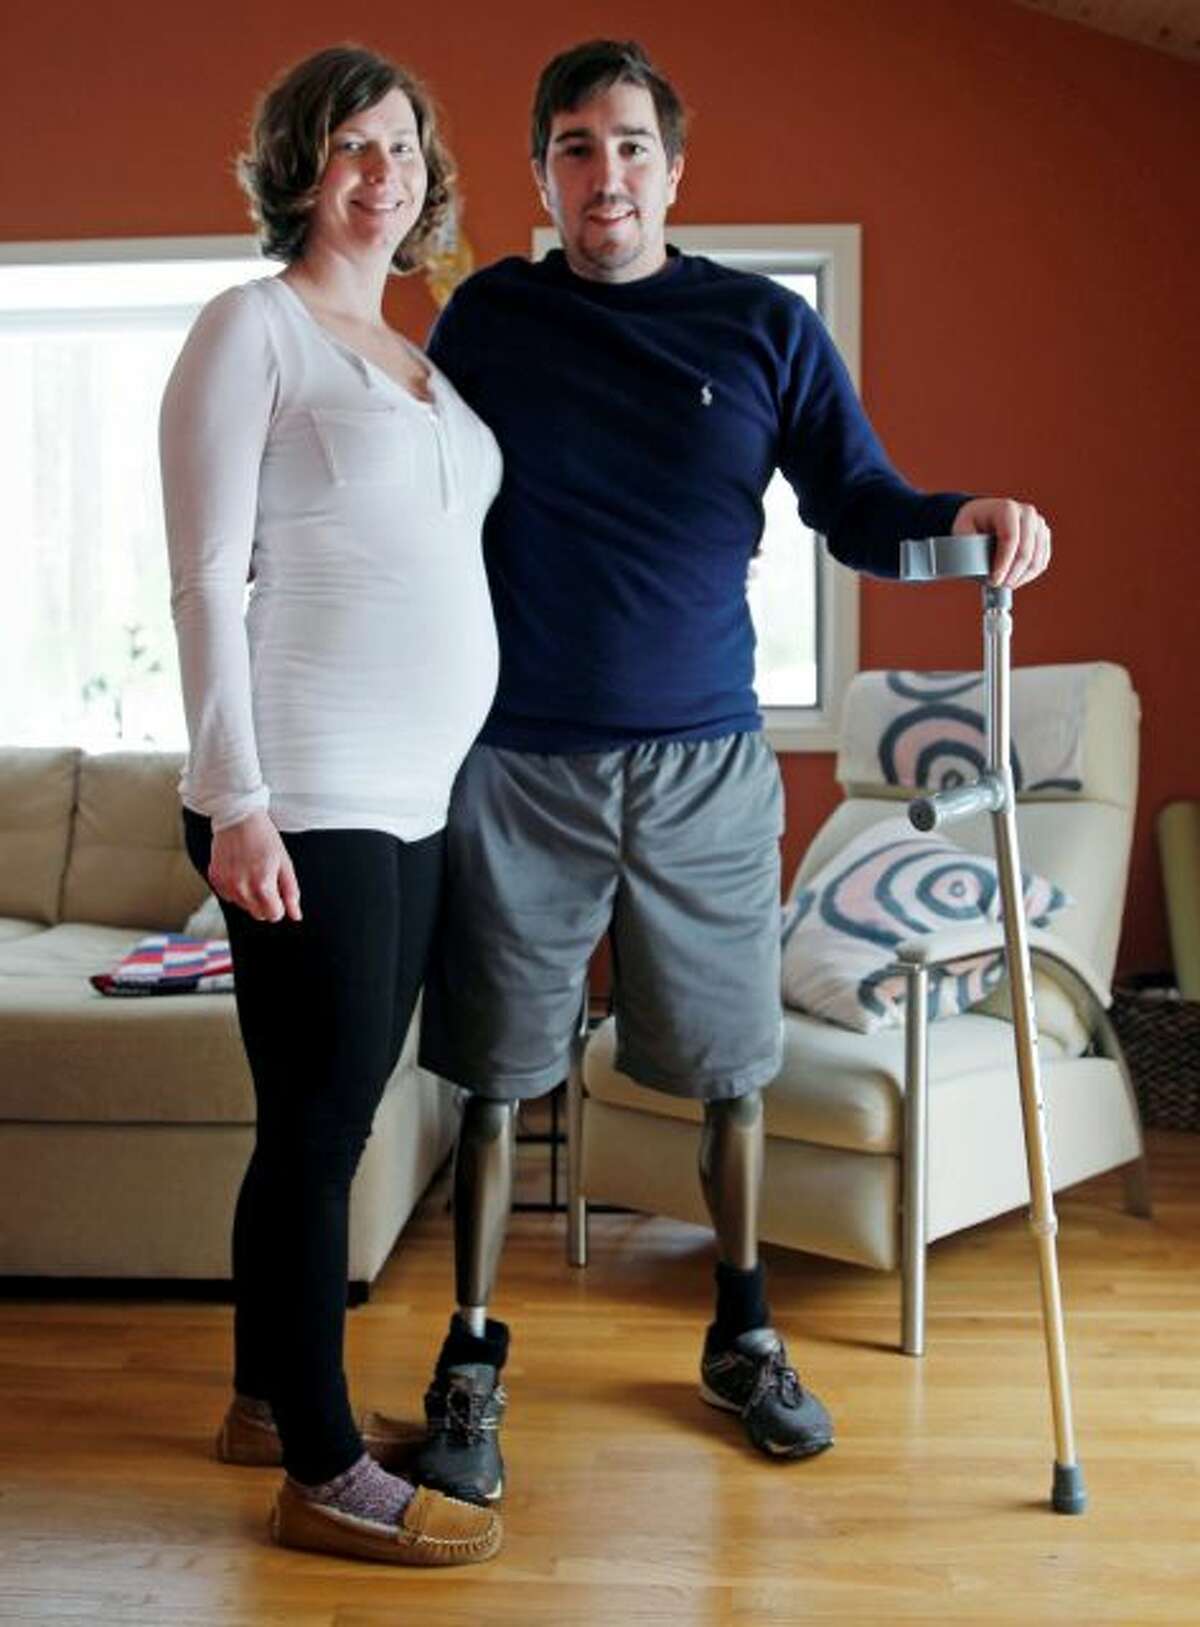 Jeff Bauman, who lost both legs in the Boston Marathon bombings, then helped authorities identify the suspects, poses with his expectant fiancé, Erin Hurley, their home in Carlisle, Mass., Friday, March 14, 2014. According to Bauman, the baby is due July 14. They don't know if it's a boy or a girl, and they want it to be a surprise. The two were engaged in February. (AP Photo/Charles Krupa)